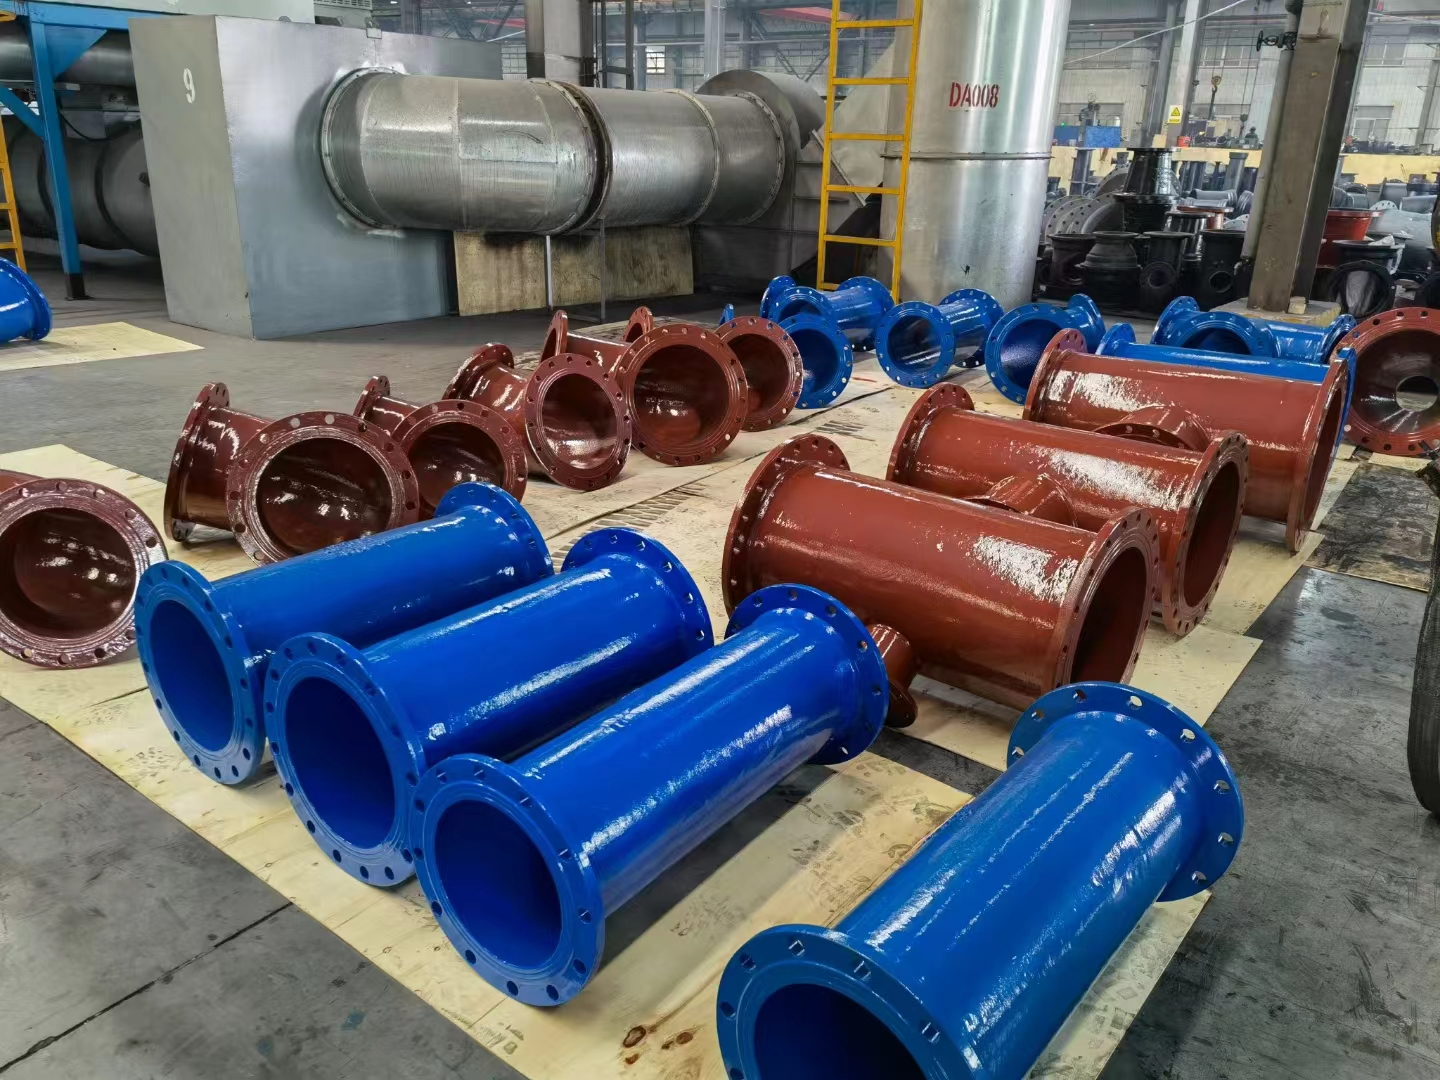 Ductile iron pipe fittings( All kinds of fittings including Bends, Tees, Elows , short pipes Y strainer, Reducer, Caps ,Plug,Flange,Cross and Etc)